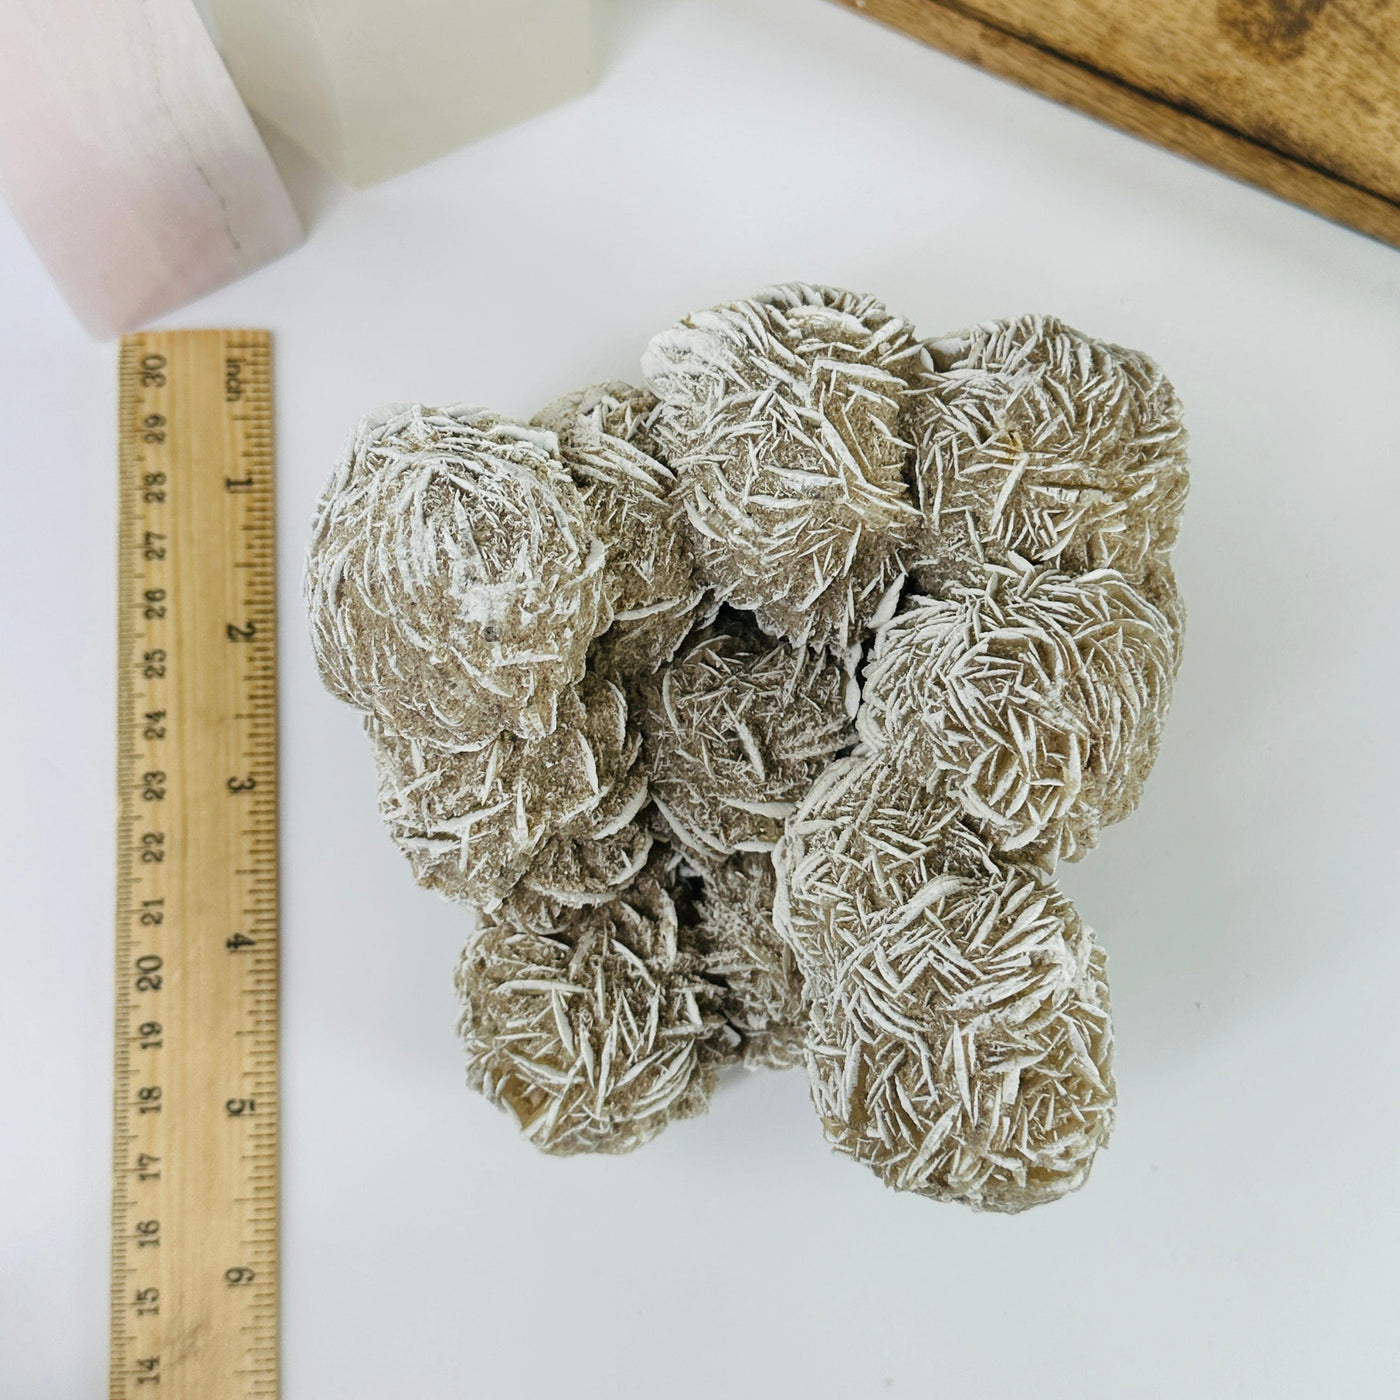 desert rose cluster next to a ruler for size reference